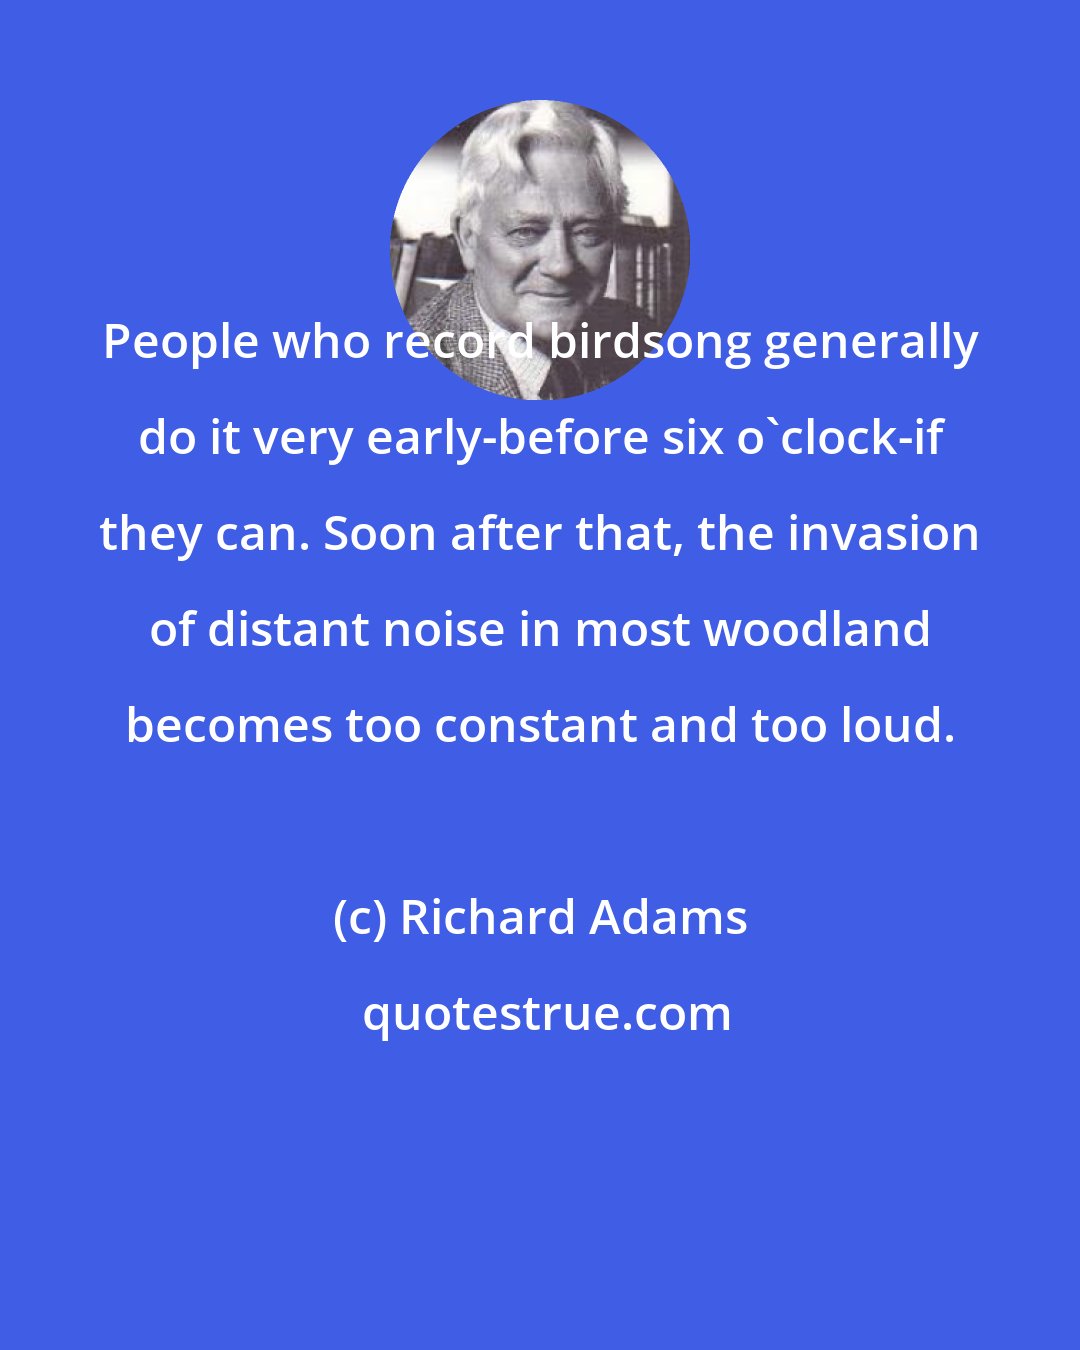 Richard Adams: People who record birdsong generally do it very early-before six o'clock-if they can. Soon after that, the invasion of distant noise in most woodland becomes too constant and too loud.